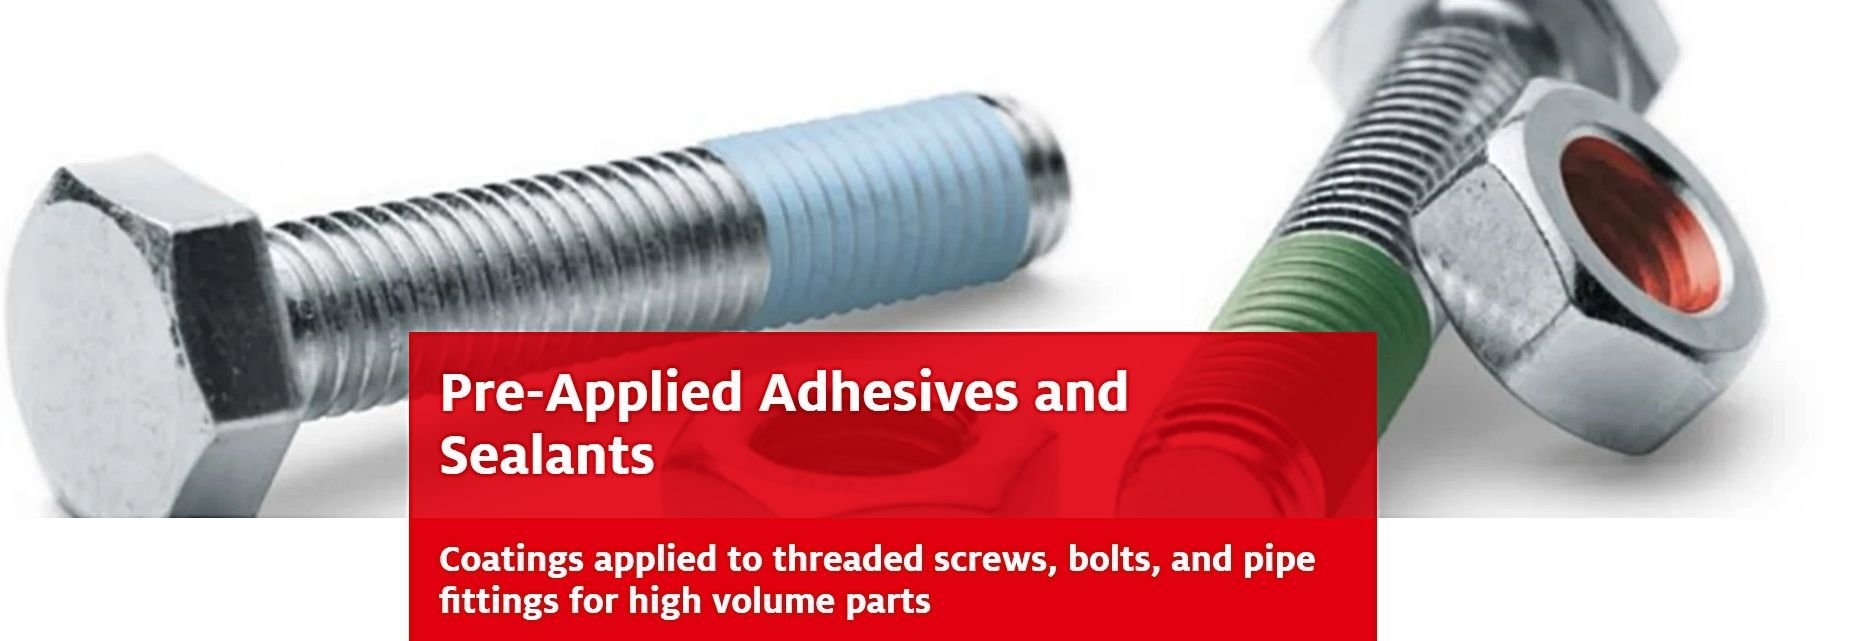 LOCTITE PRE-APPLIED ADHESIVES AND SEALANTS